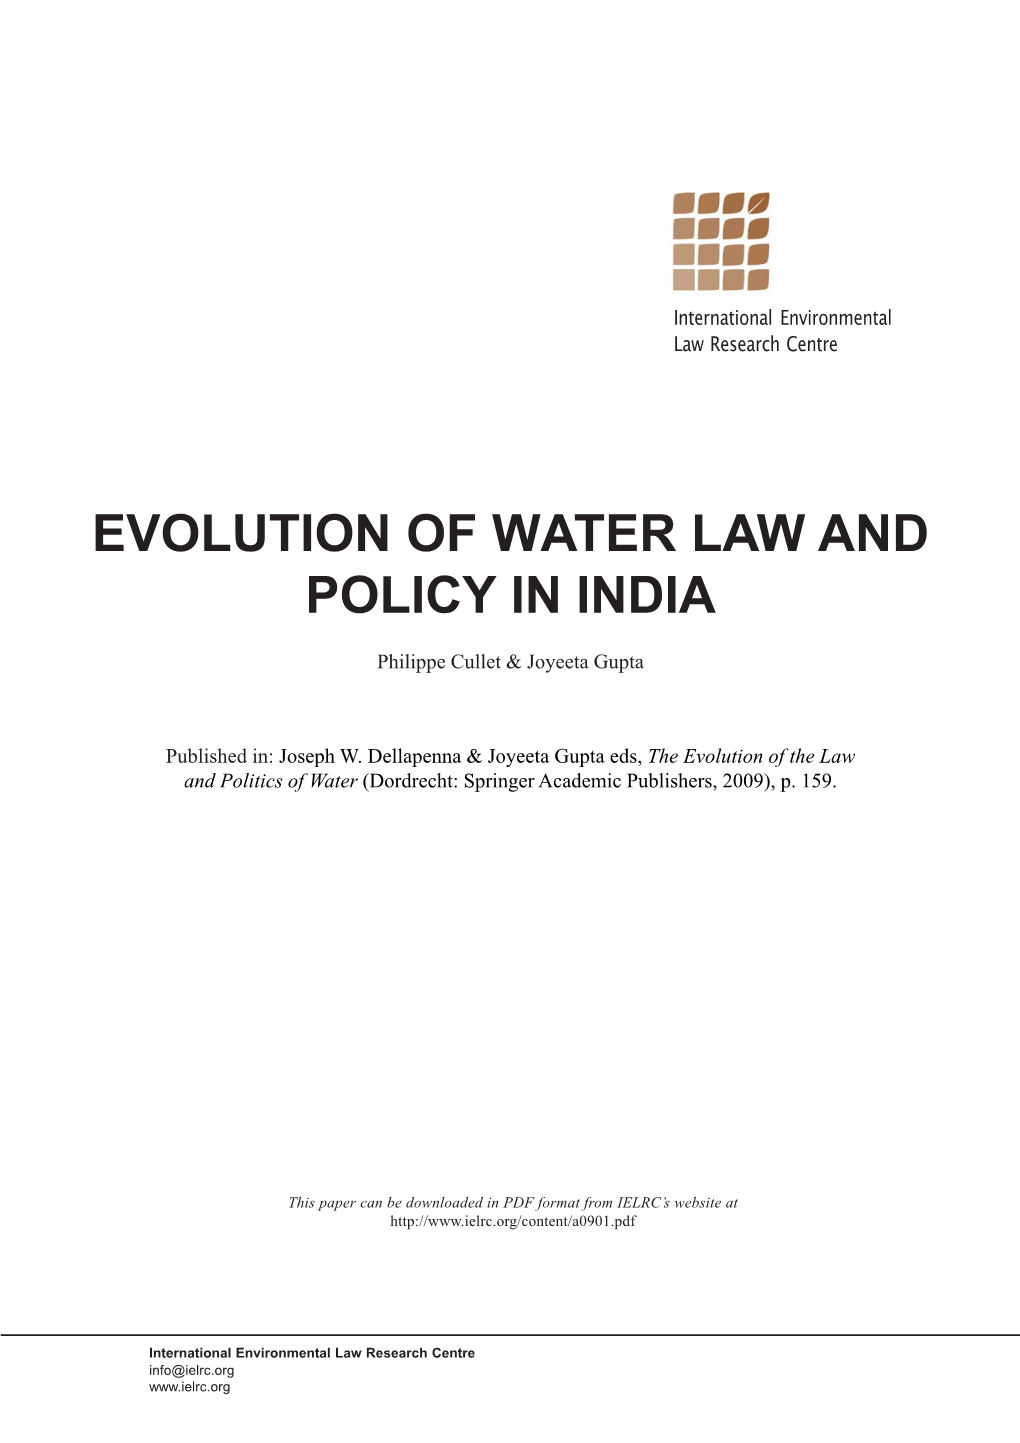 Evolution of Water Law and Policy in India